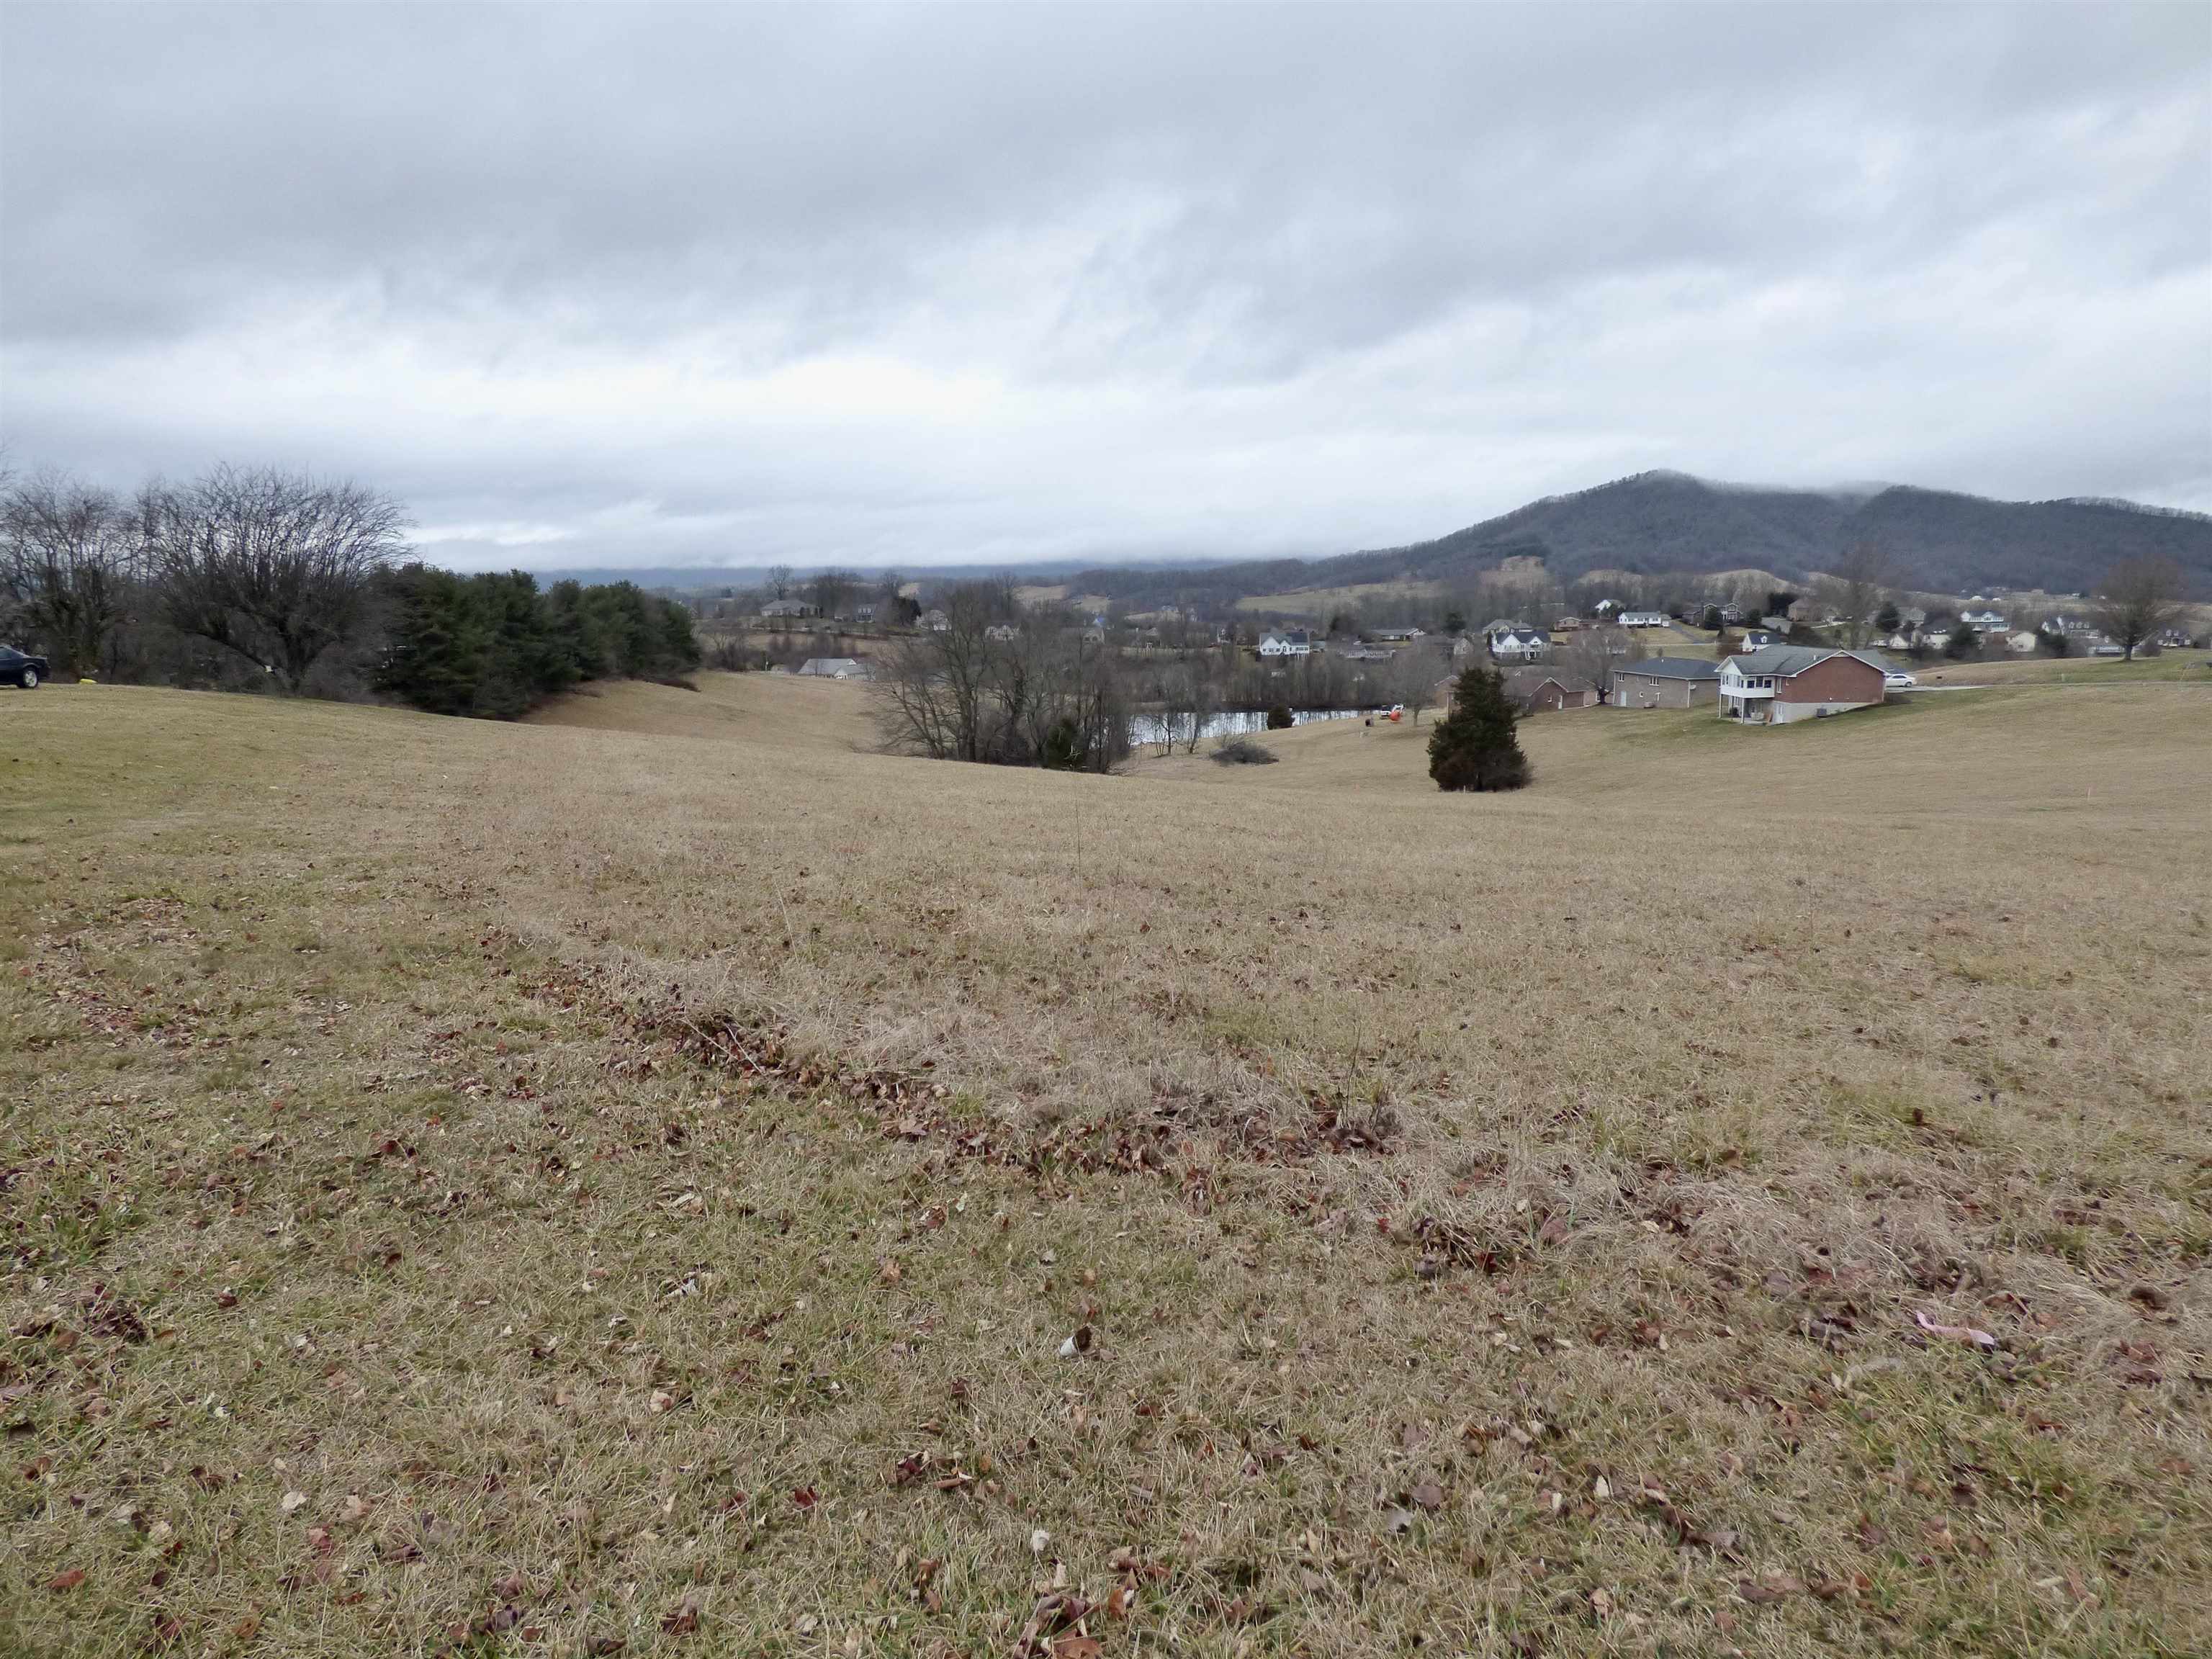 This .533-acre residential lot offers a great building site with mountain views and is zoned R1 for residential use. It's conveniently located with easy interstate access and has town water and sewer available. It is ideal for those looking to build a home in a scenic yet accessible location.